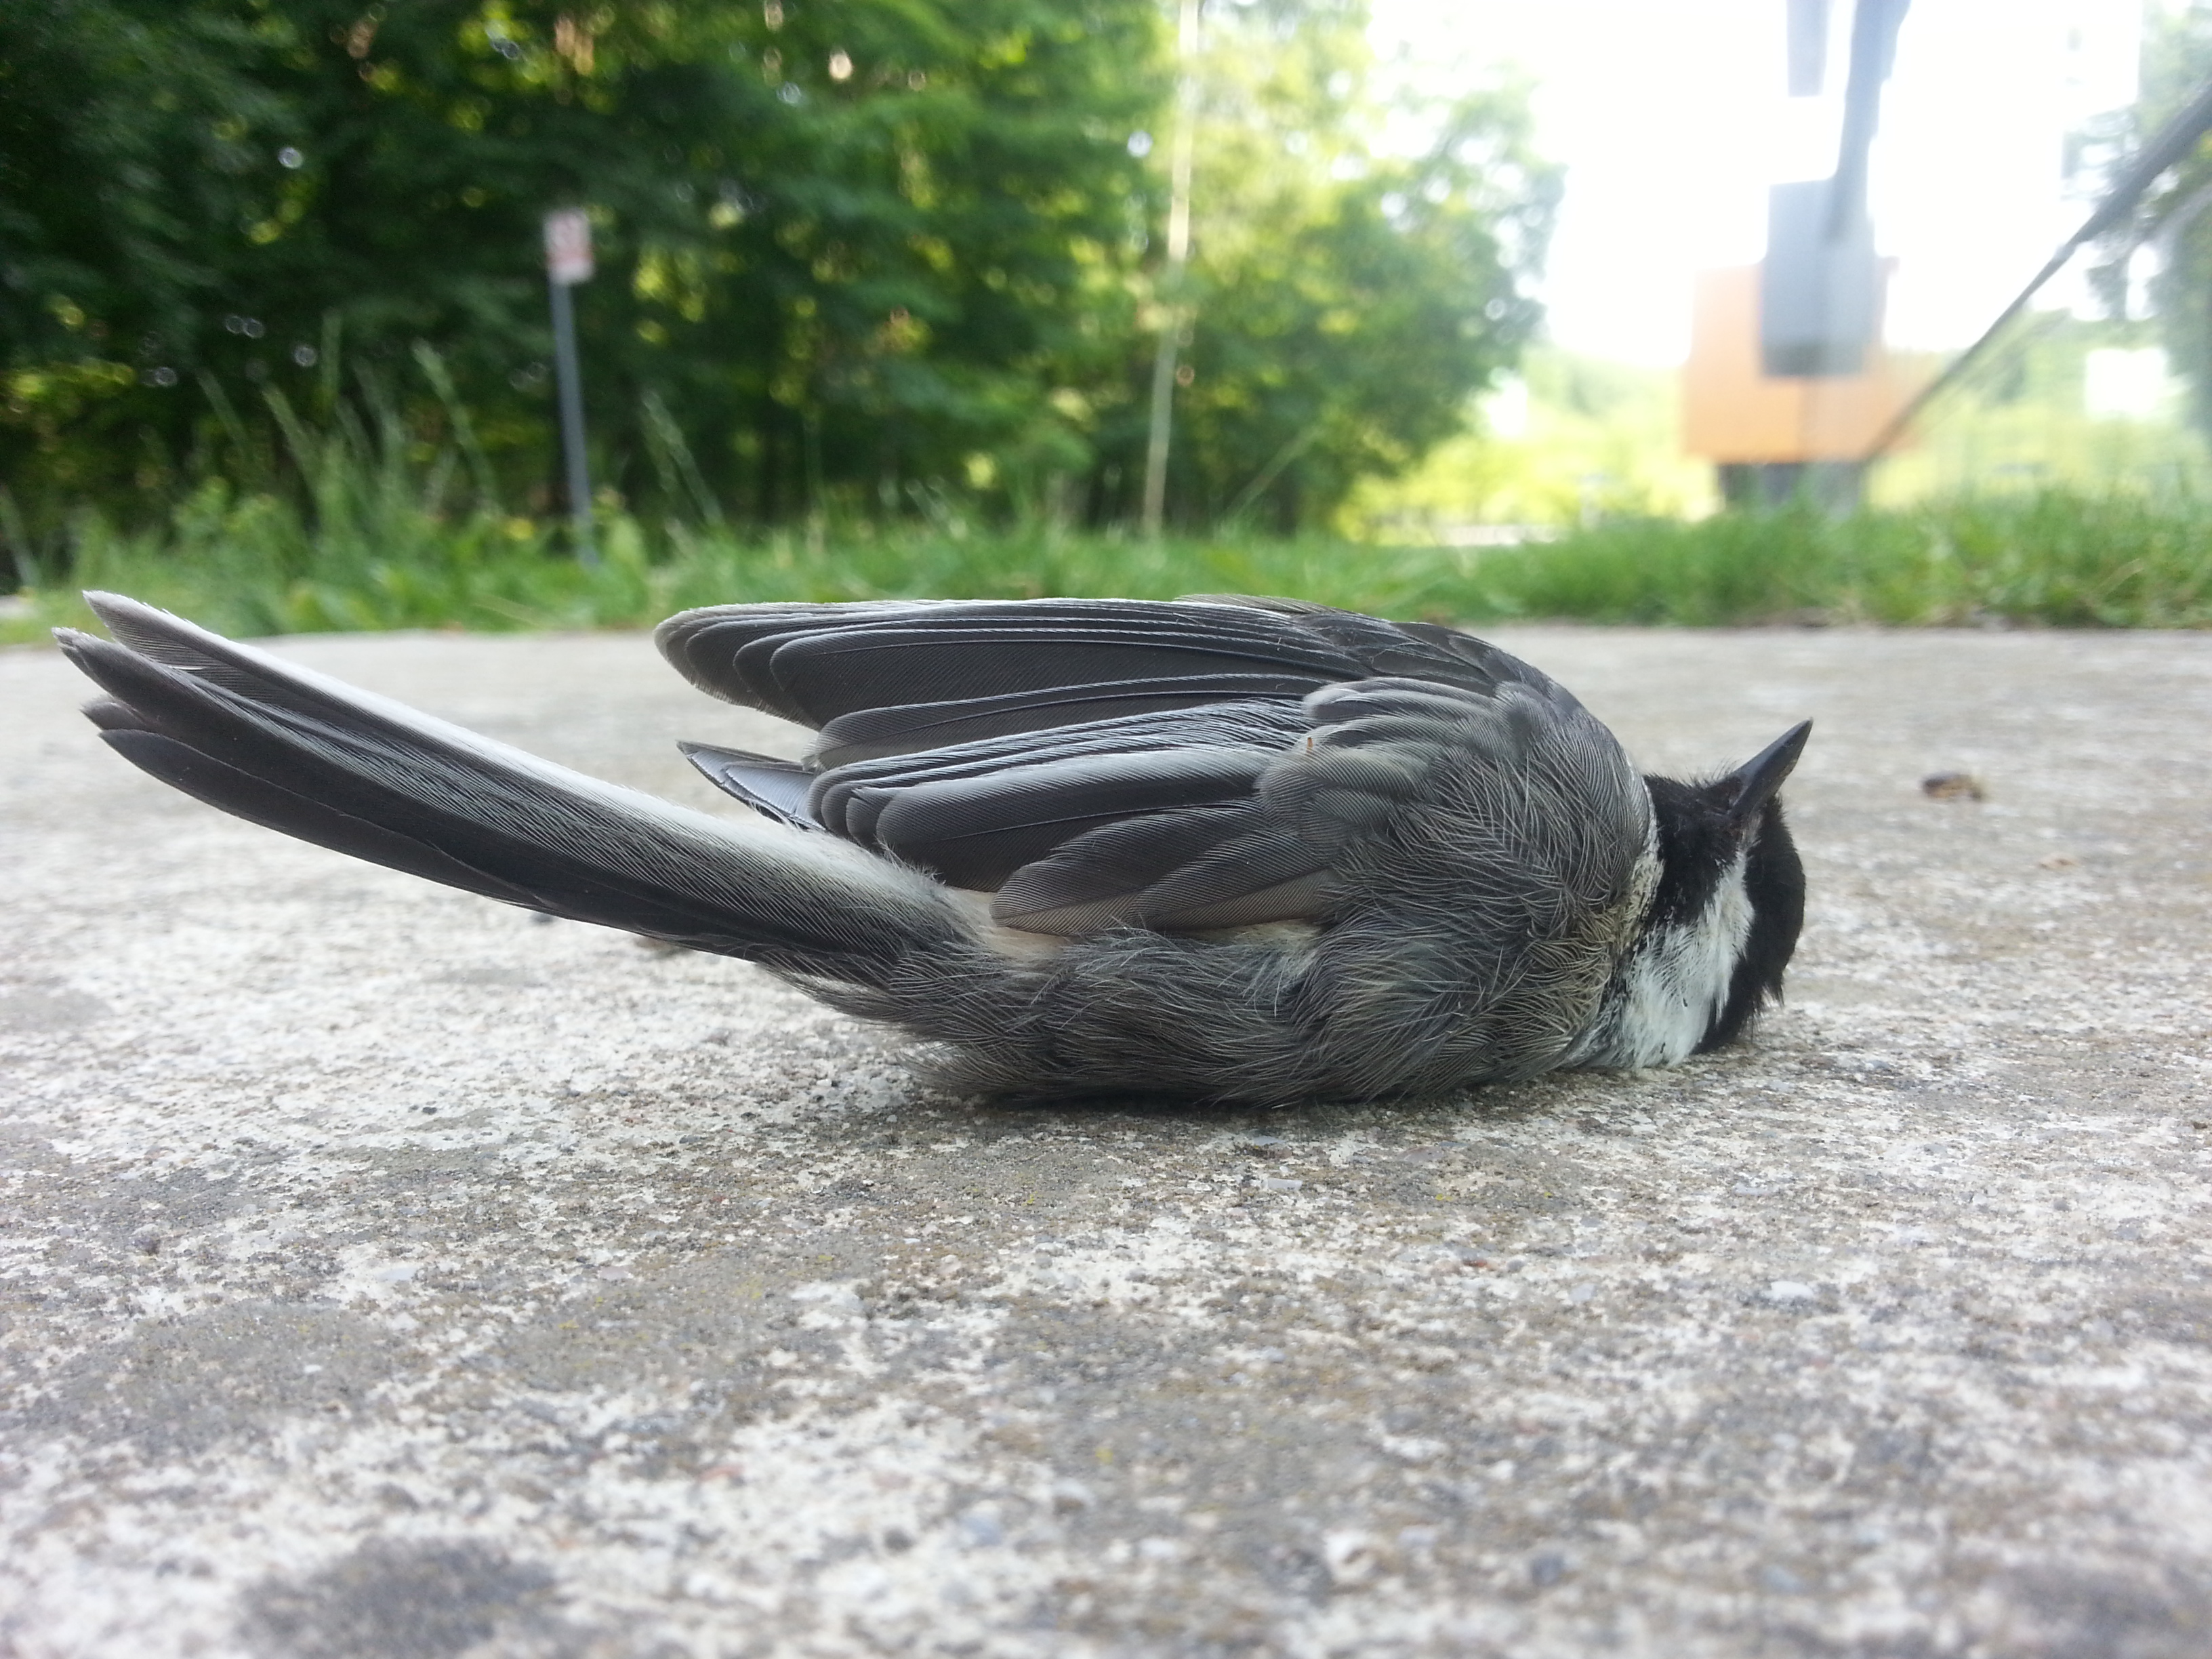 A songbird killed by a collision with a window